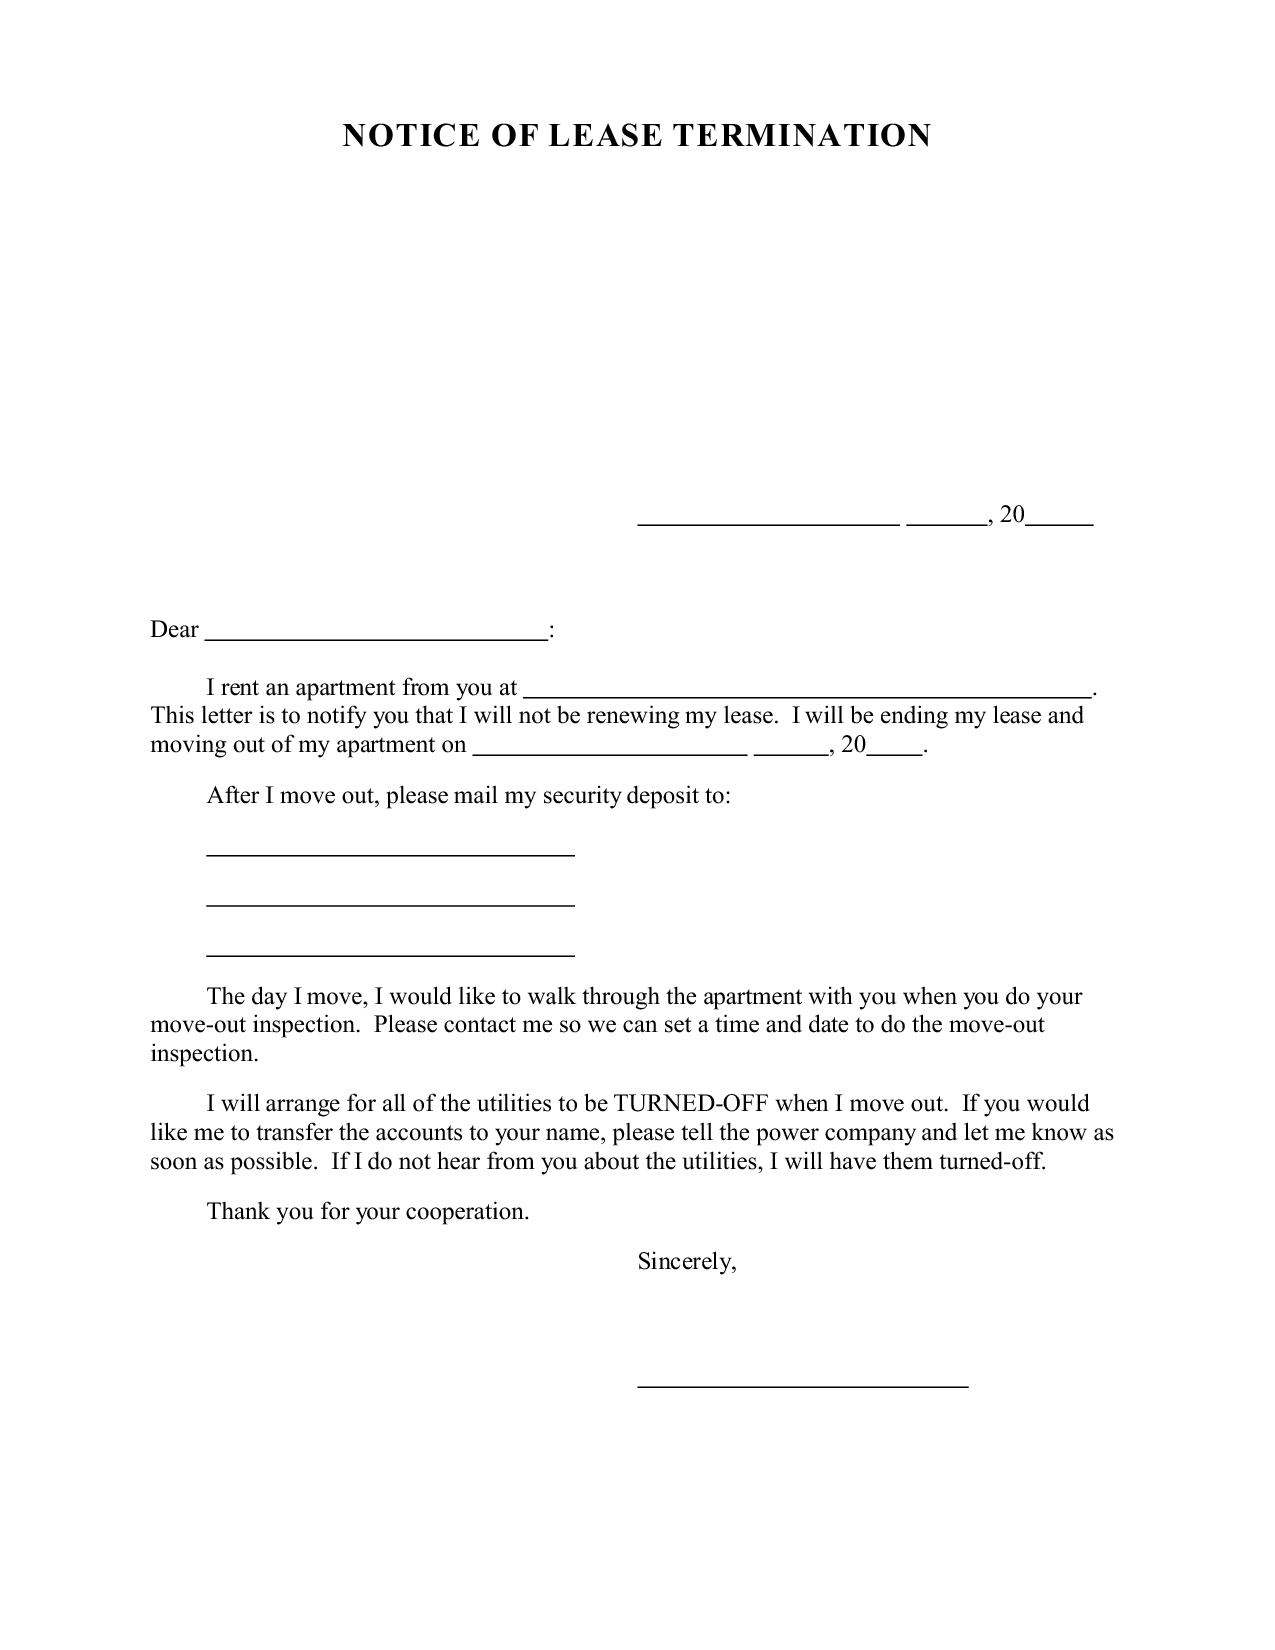 lease-release-letter-free-printable-documents